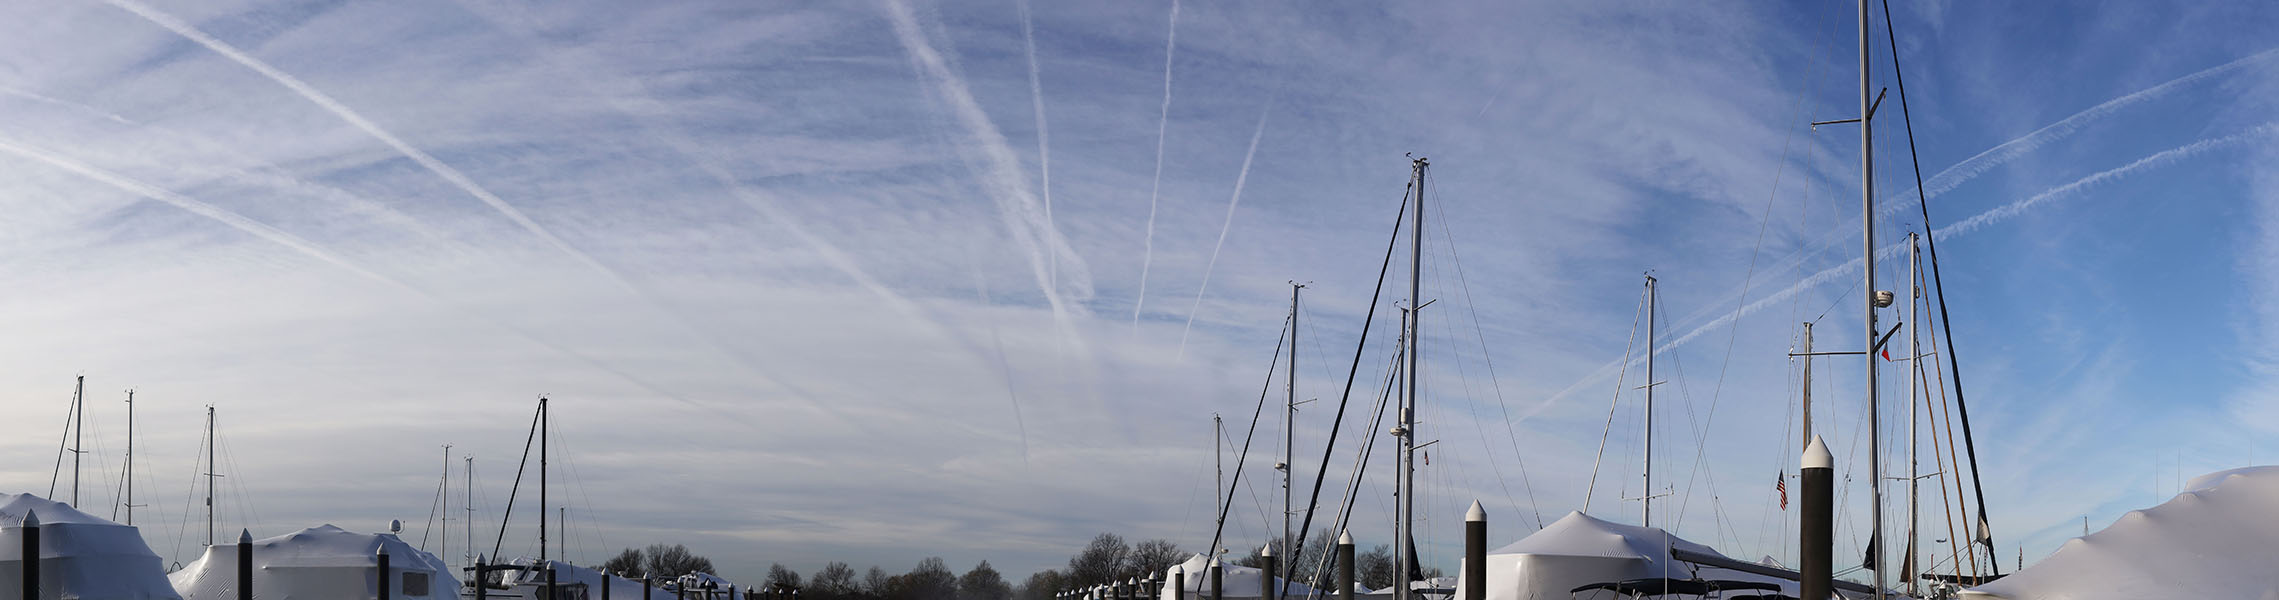 Panoramic Photo of Many Contrails Above a Marina